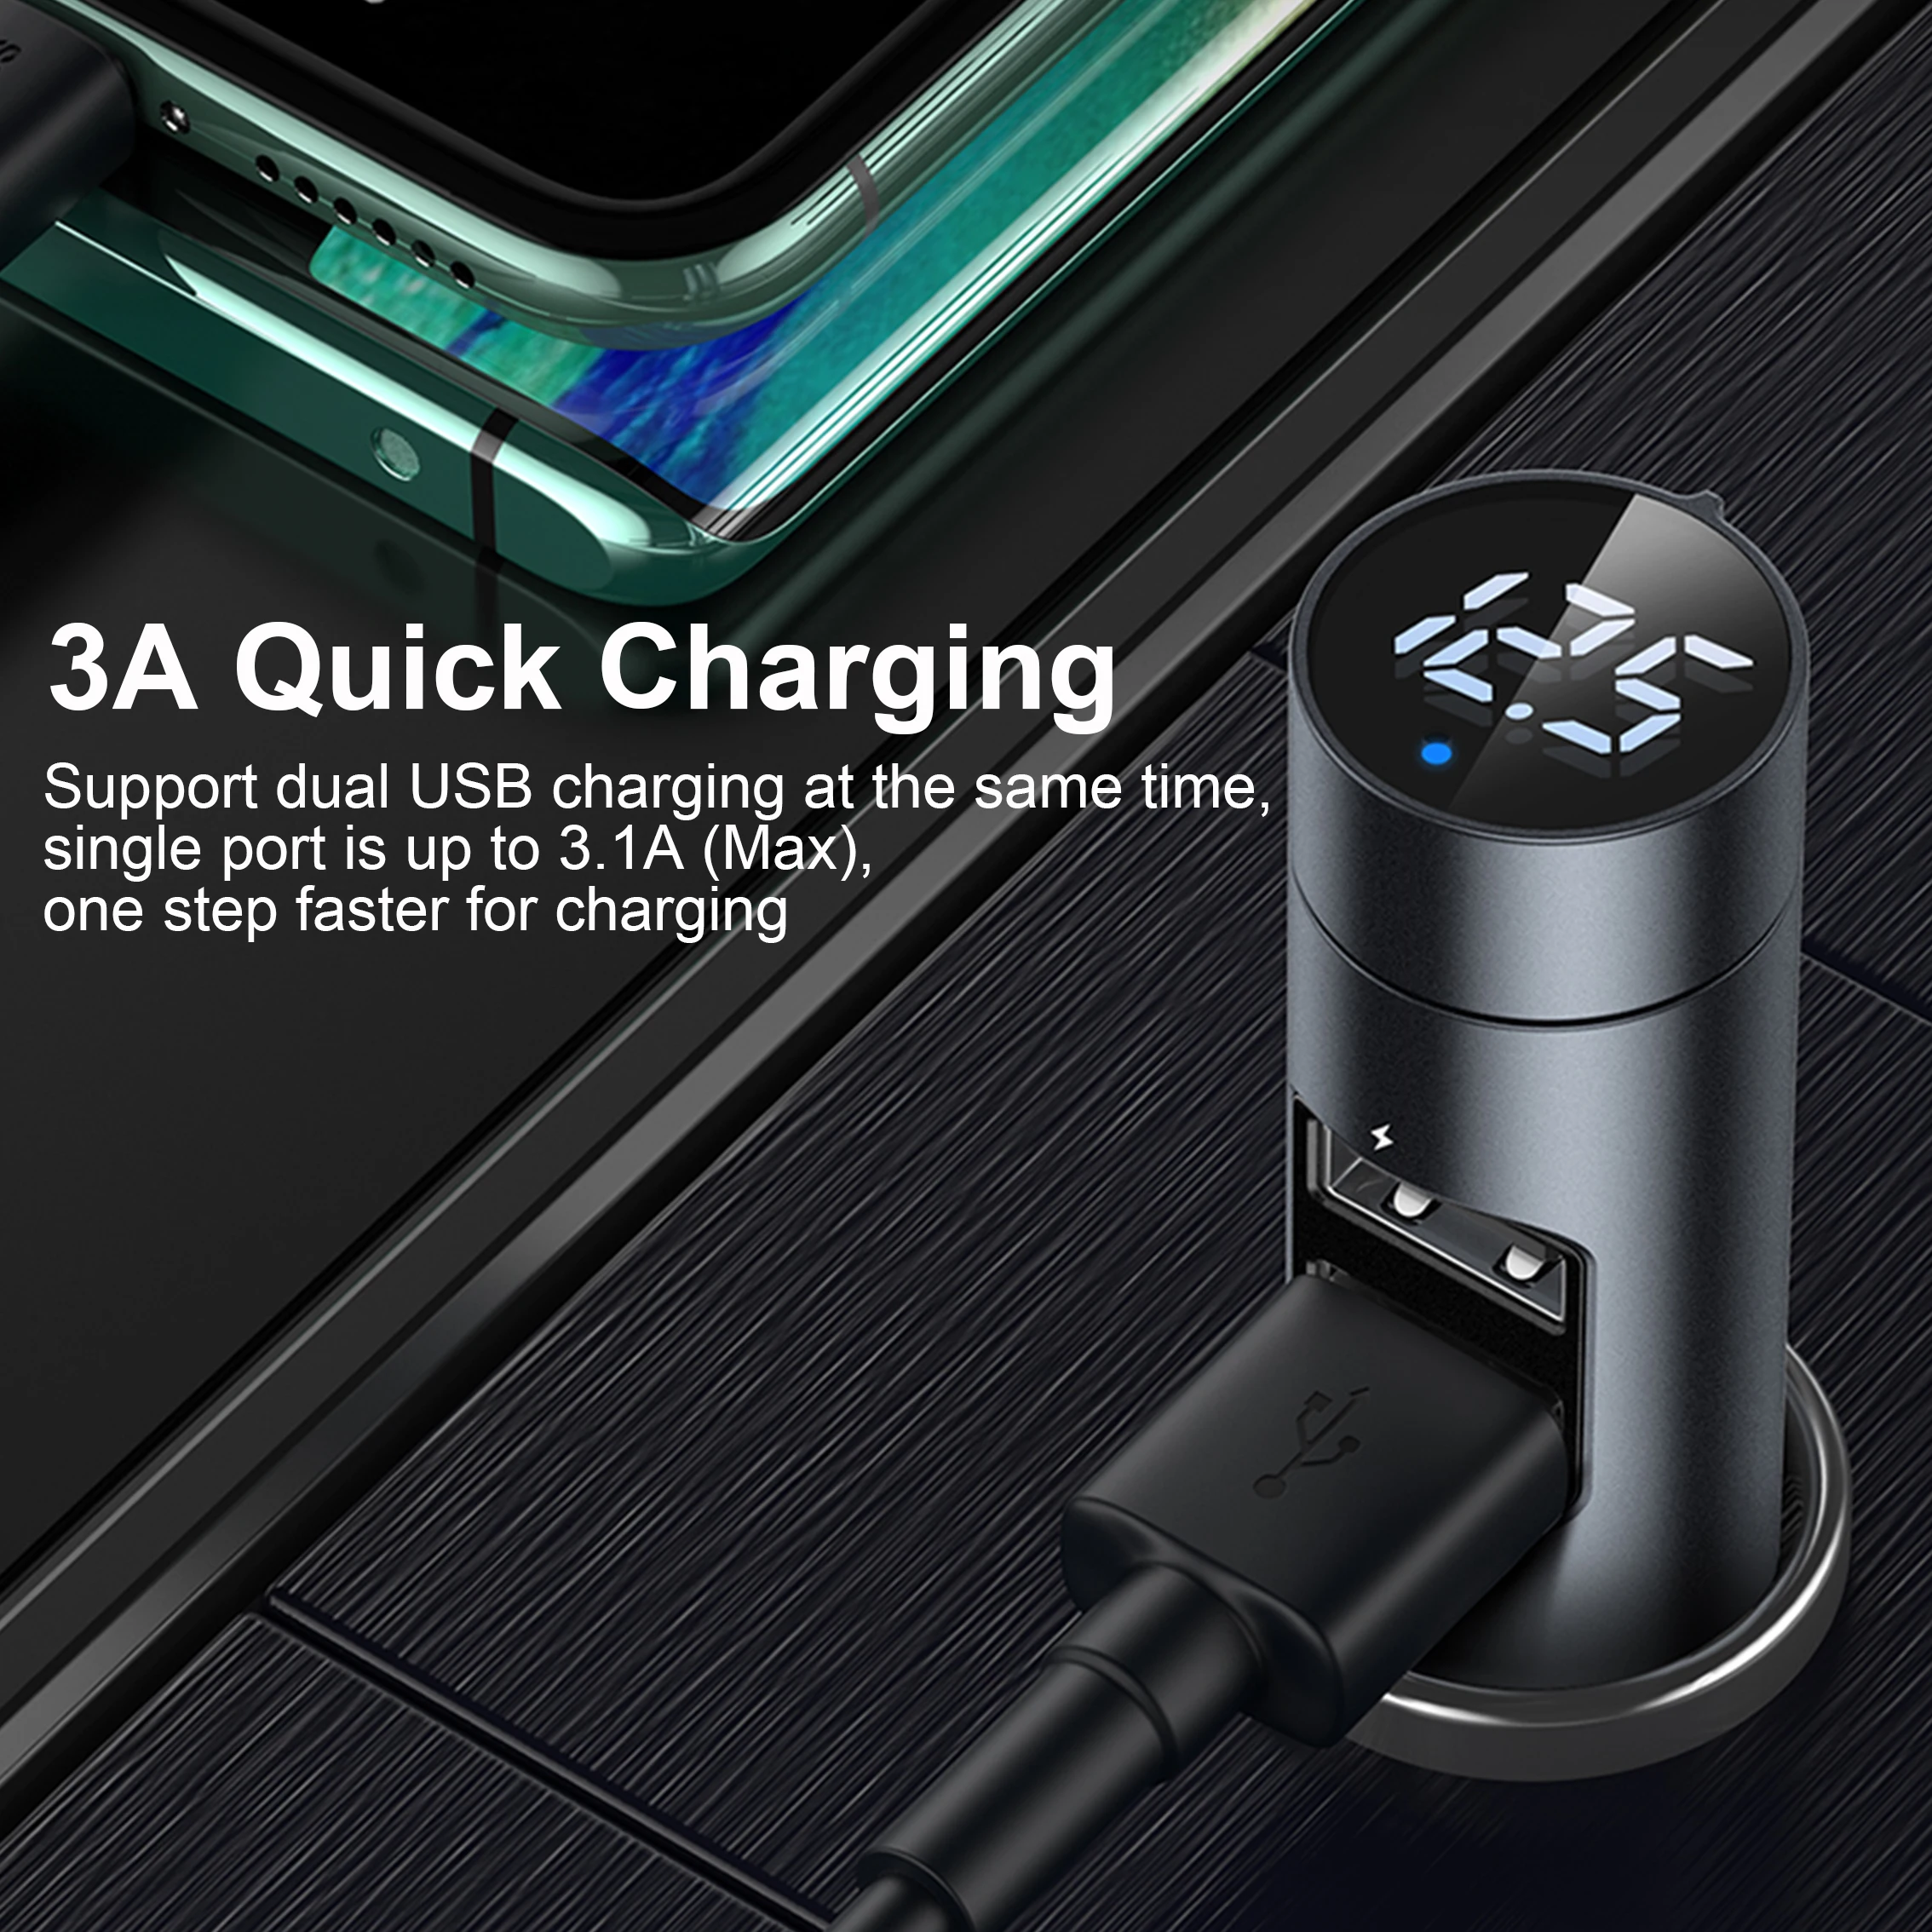 baseus 3 1a car charger bluetooth 5 0 adapter fm transmitter wireless audio receiver mobile phone charger for iphone samsung free global shipping